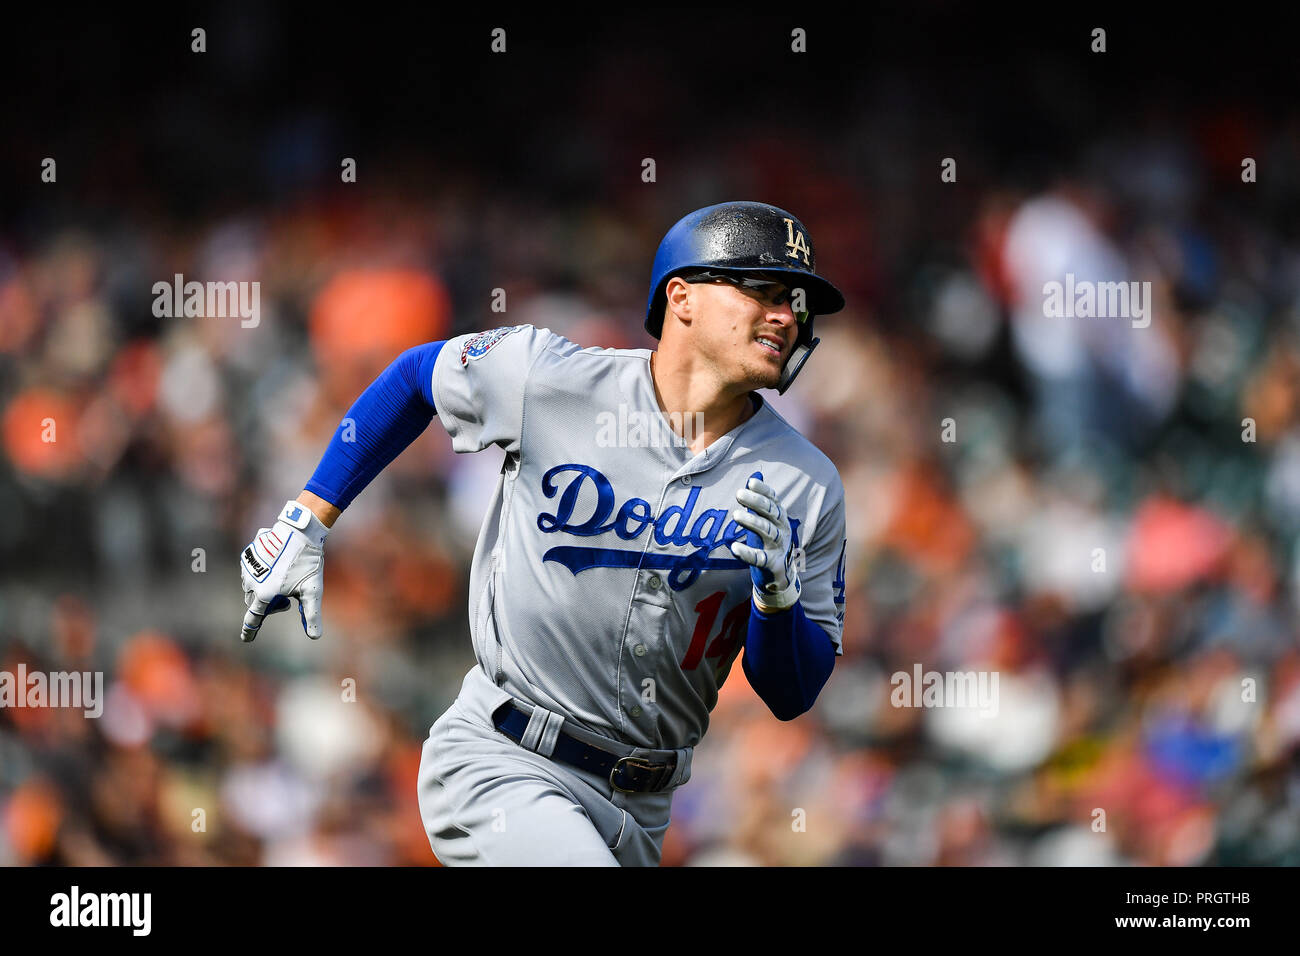 San Francisco, California, USA. 30th Sep, 2018. Los Angeles Dodgers center fielder Enrique Hernandez (14) heading to first base during the MLB game between the Los Angeles Dodgers and the San Francisco Giants at AT&T Park in San Francisco, California. Chris Brown/CSM/Alamy Live News Stock Photo